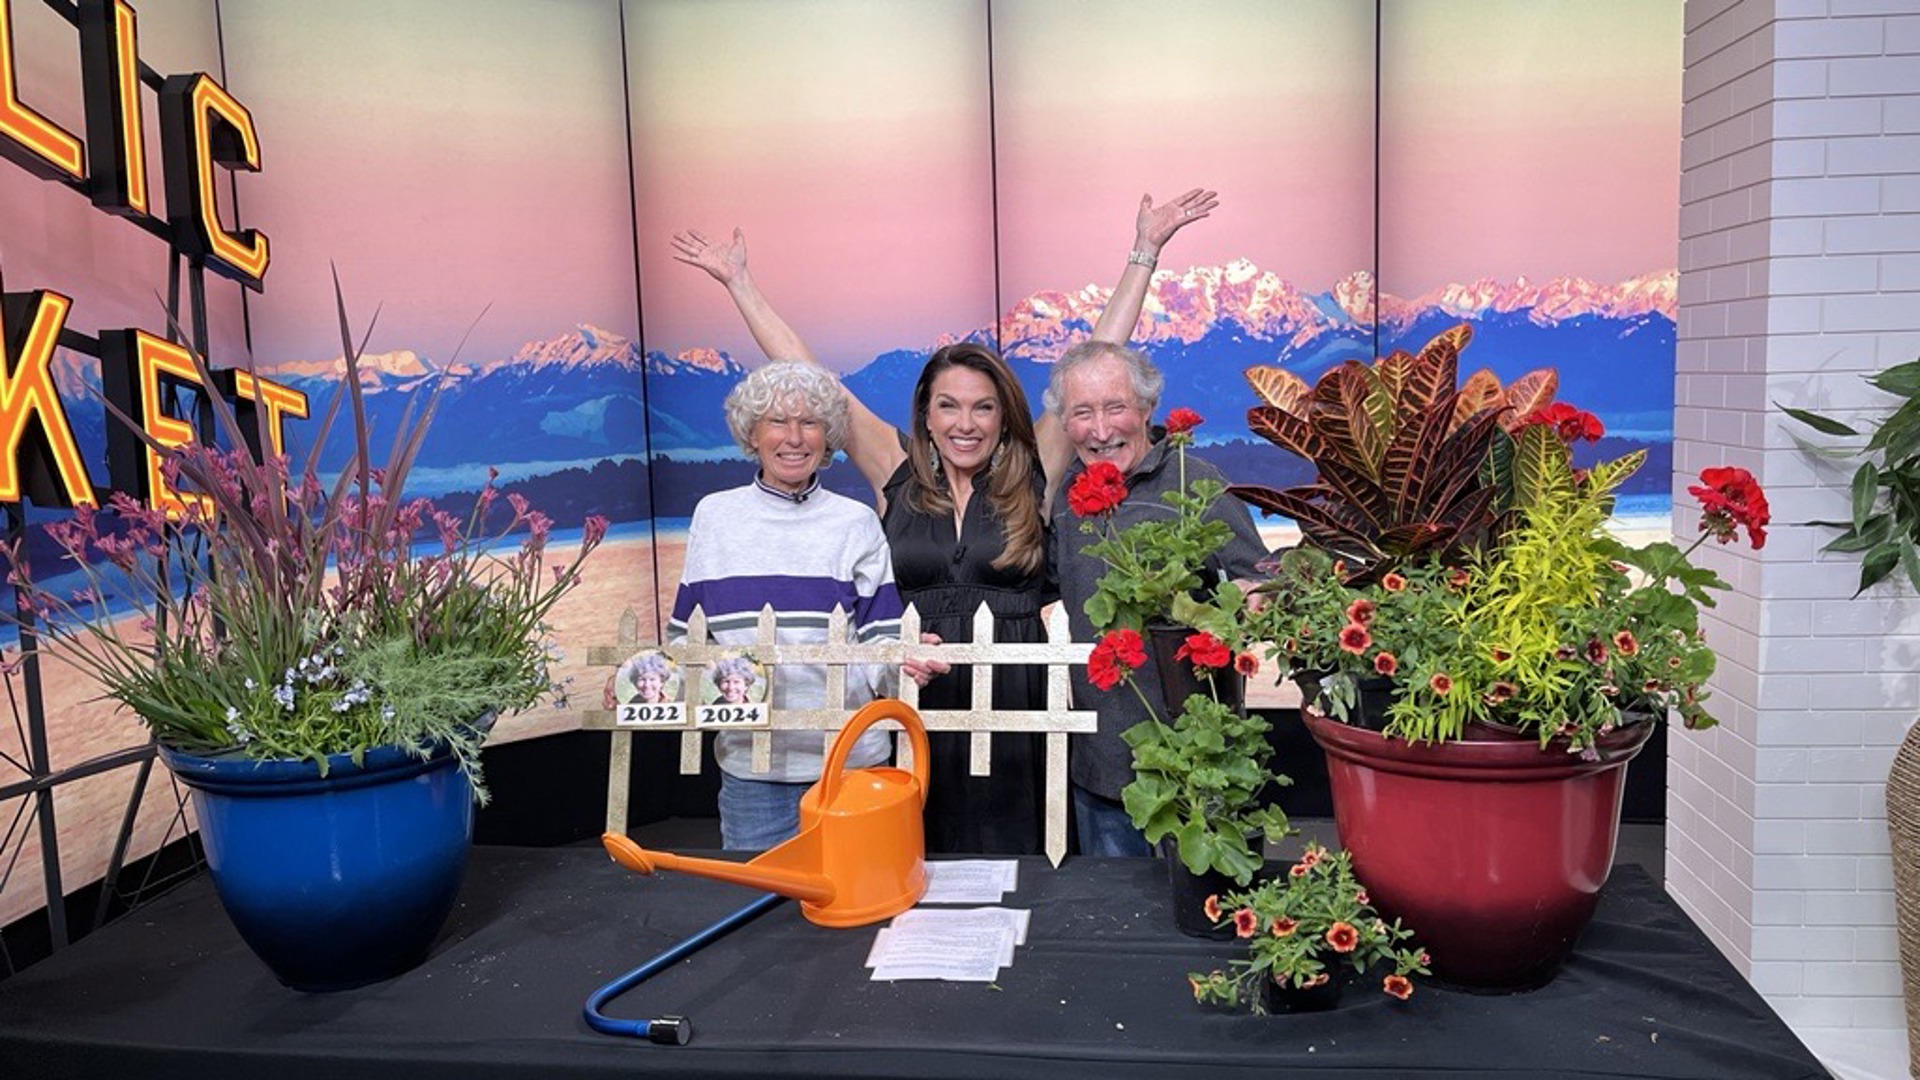 Ciscoe and his wife Mary, both gardeners, fill a pot with their favorite plant combos. #newdaynw